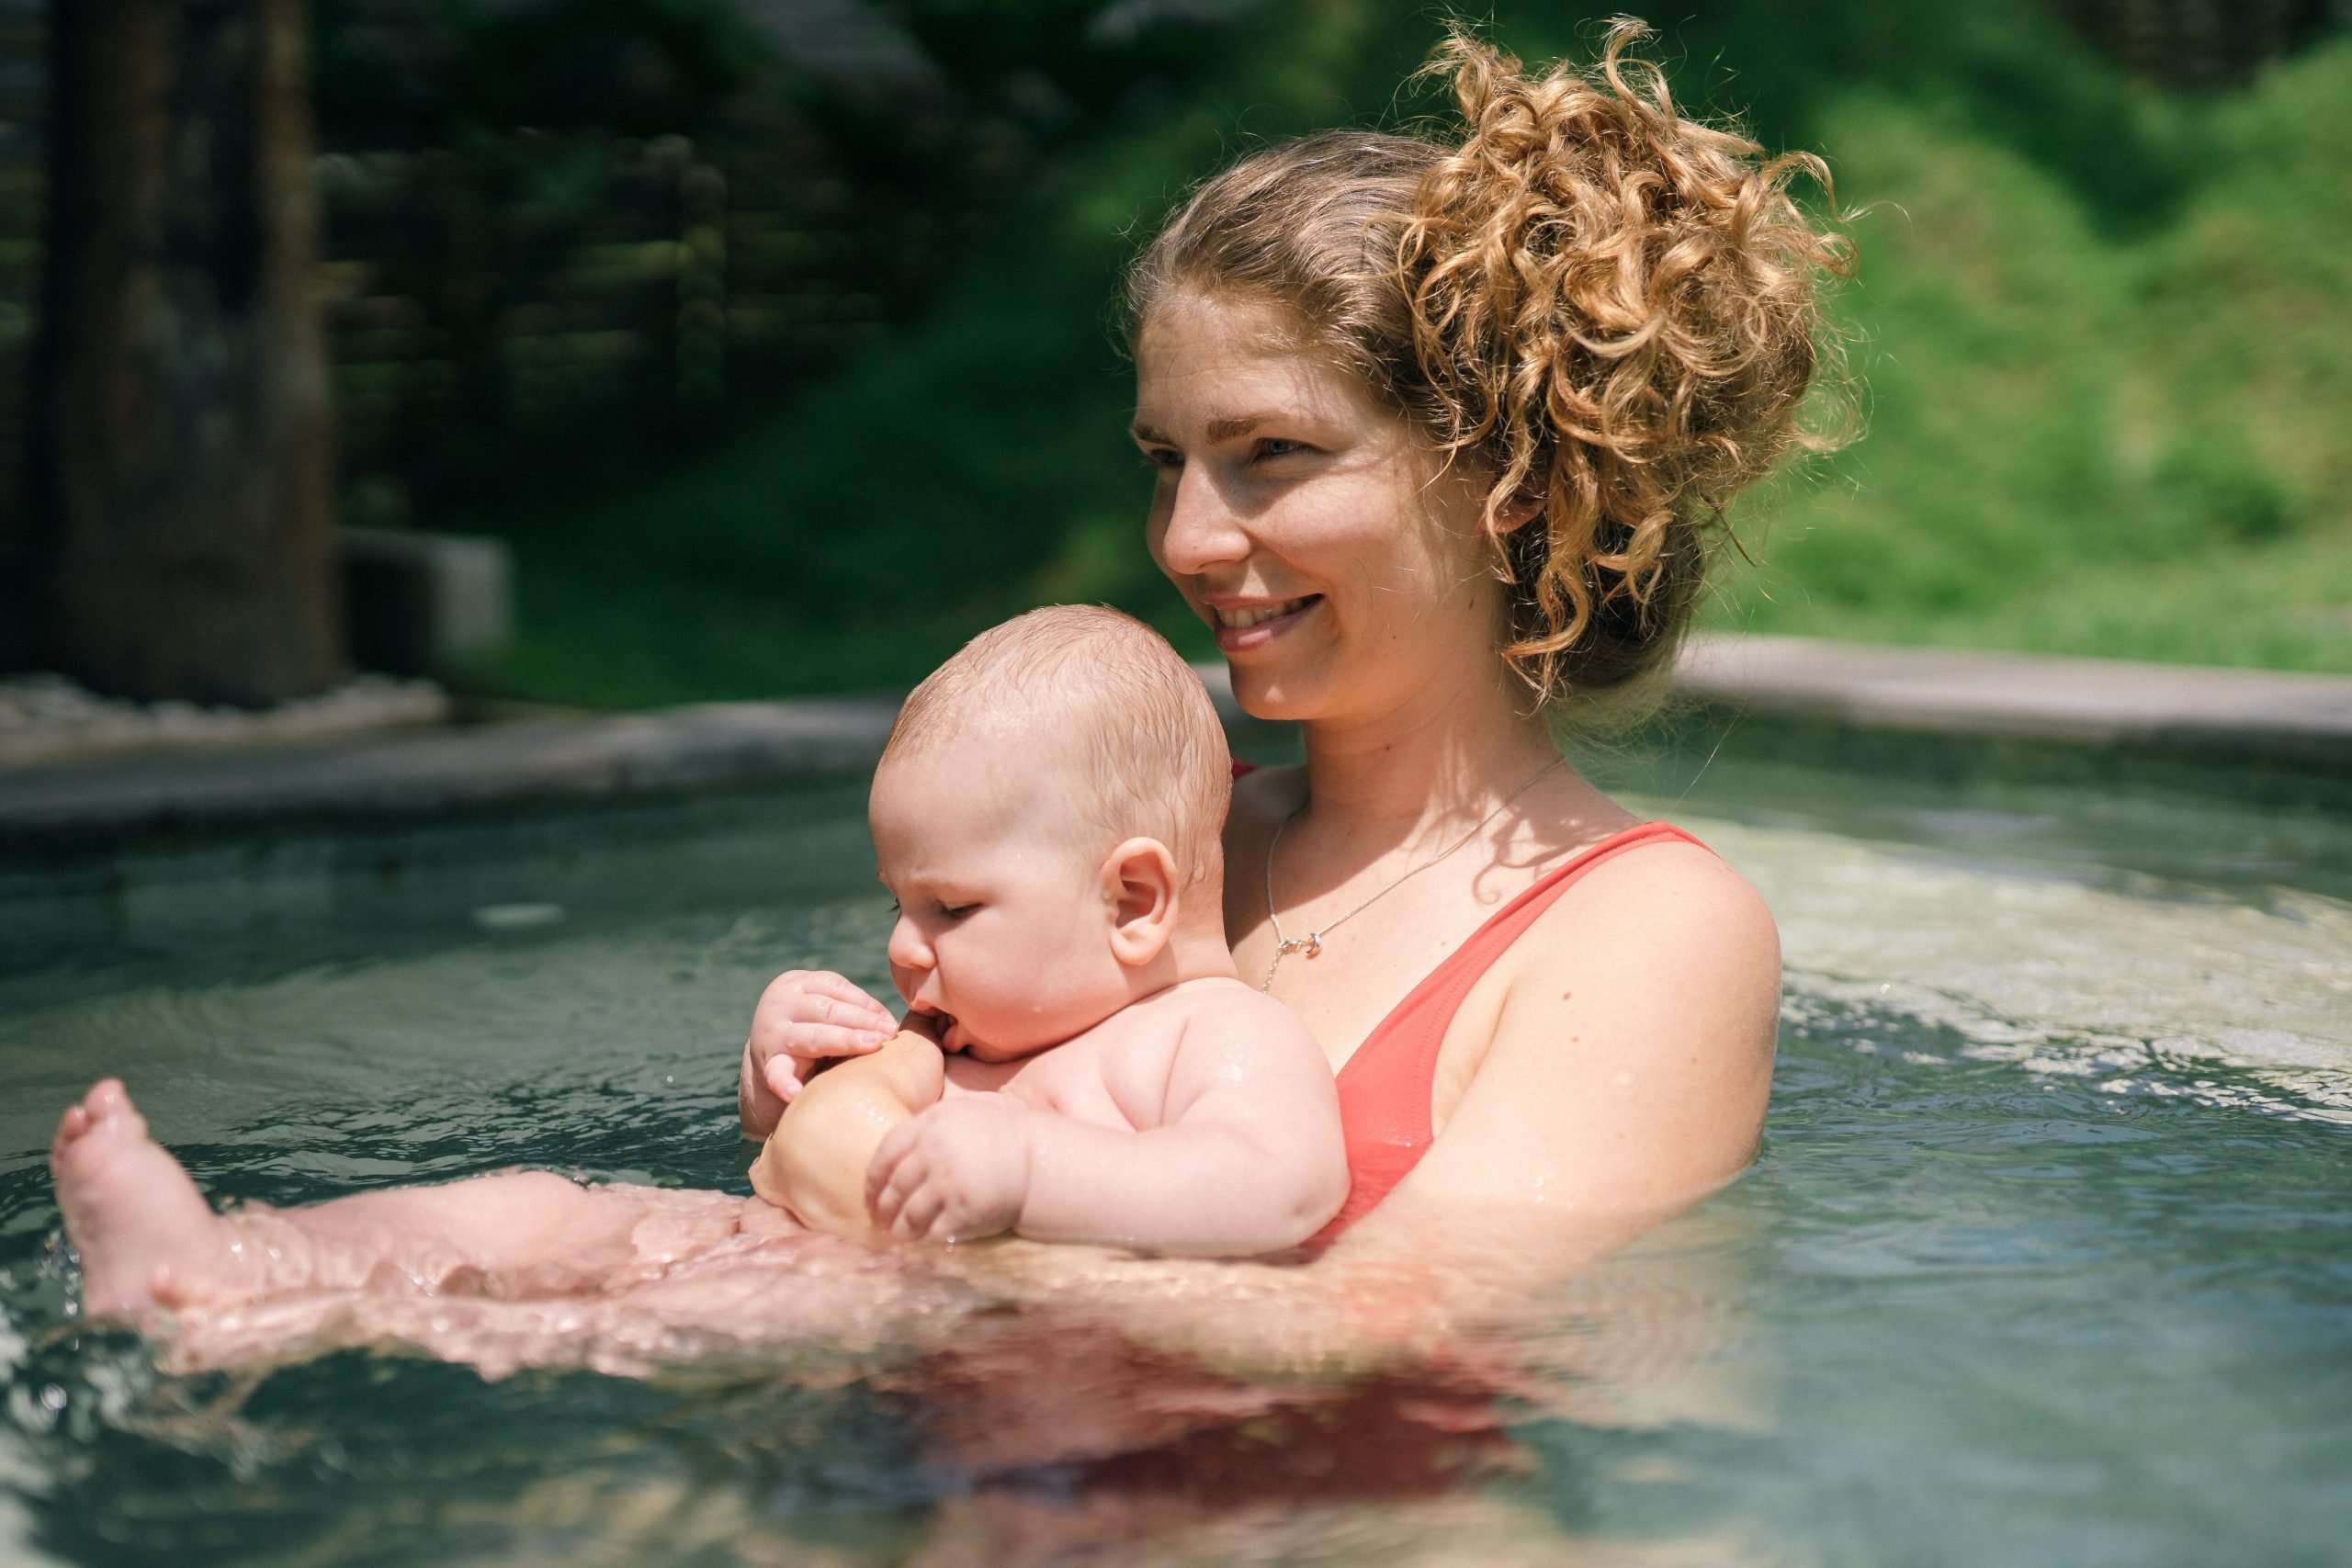 Can babies get sick from pool water?